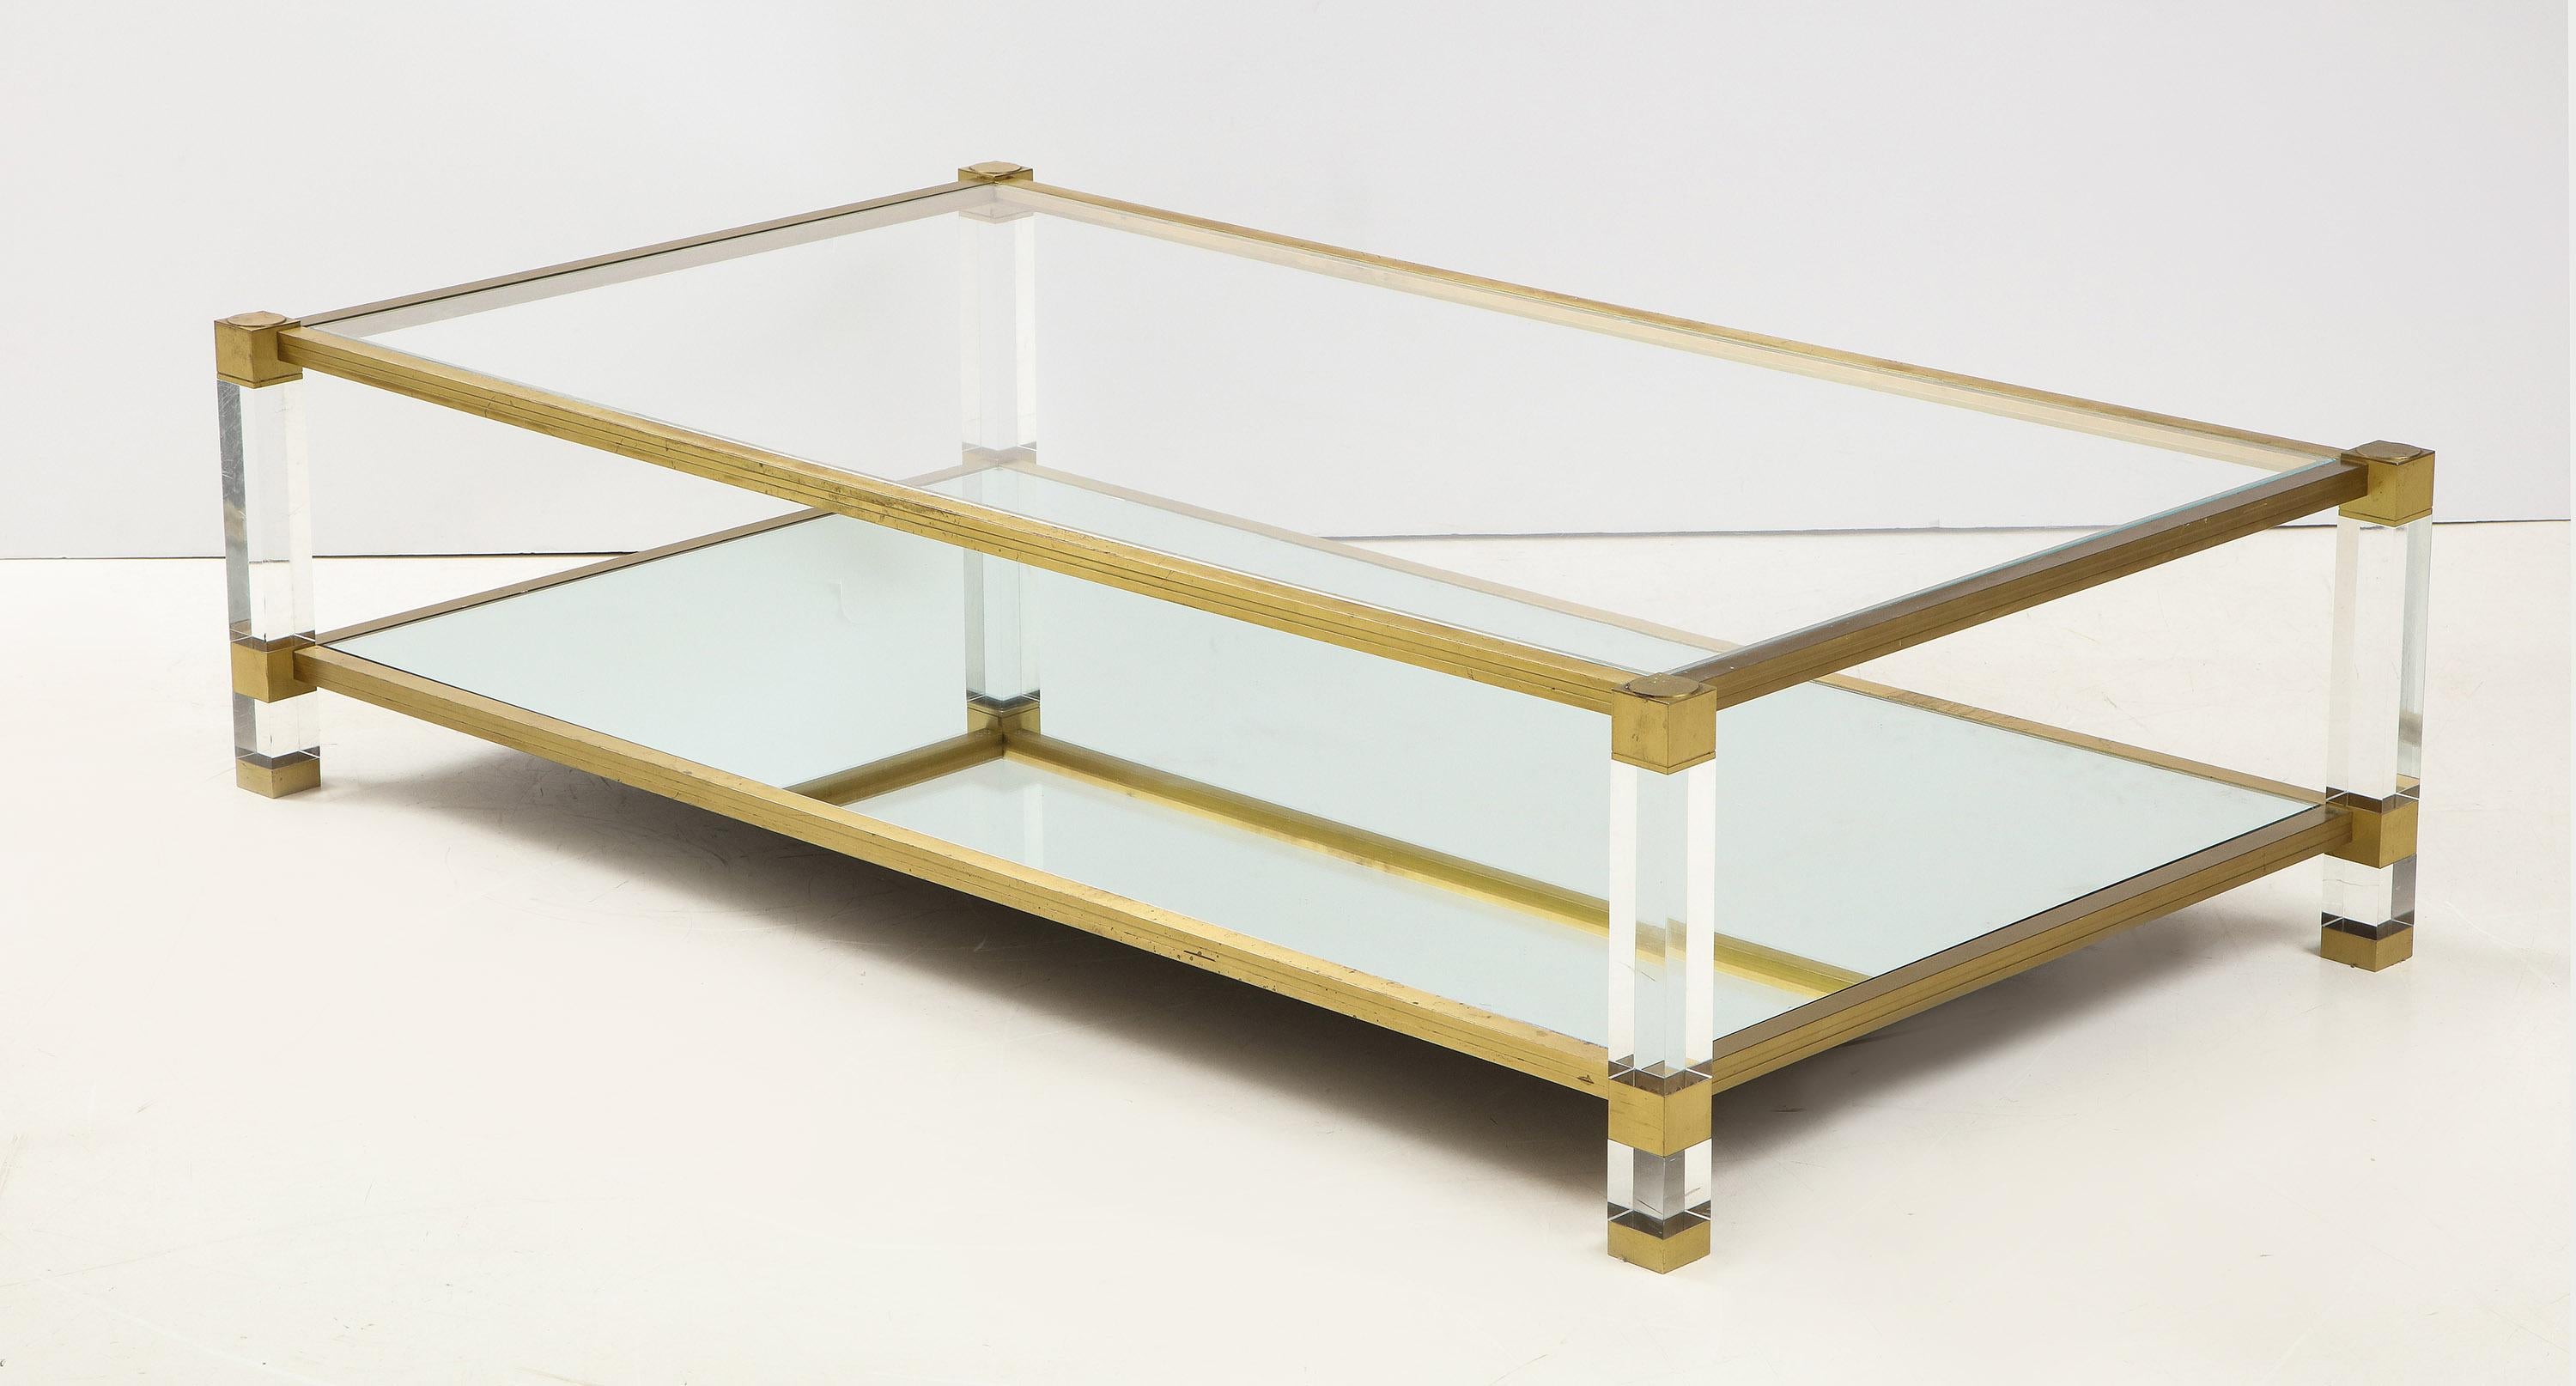 A large French Mid-Century Modern, two tier cocktail table in Lucite and brass by Pierre Vandel. The rectangular form with top section inset with glass and the lower inset with mirror.